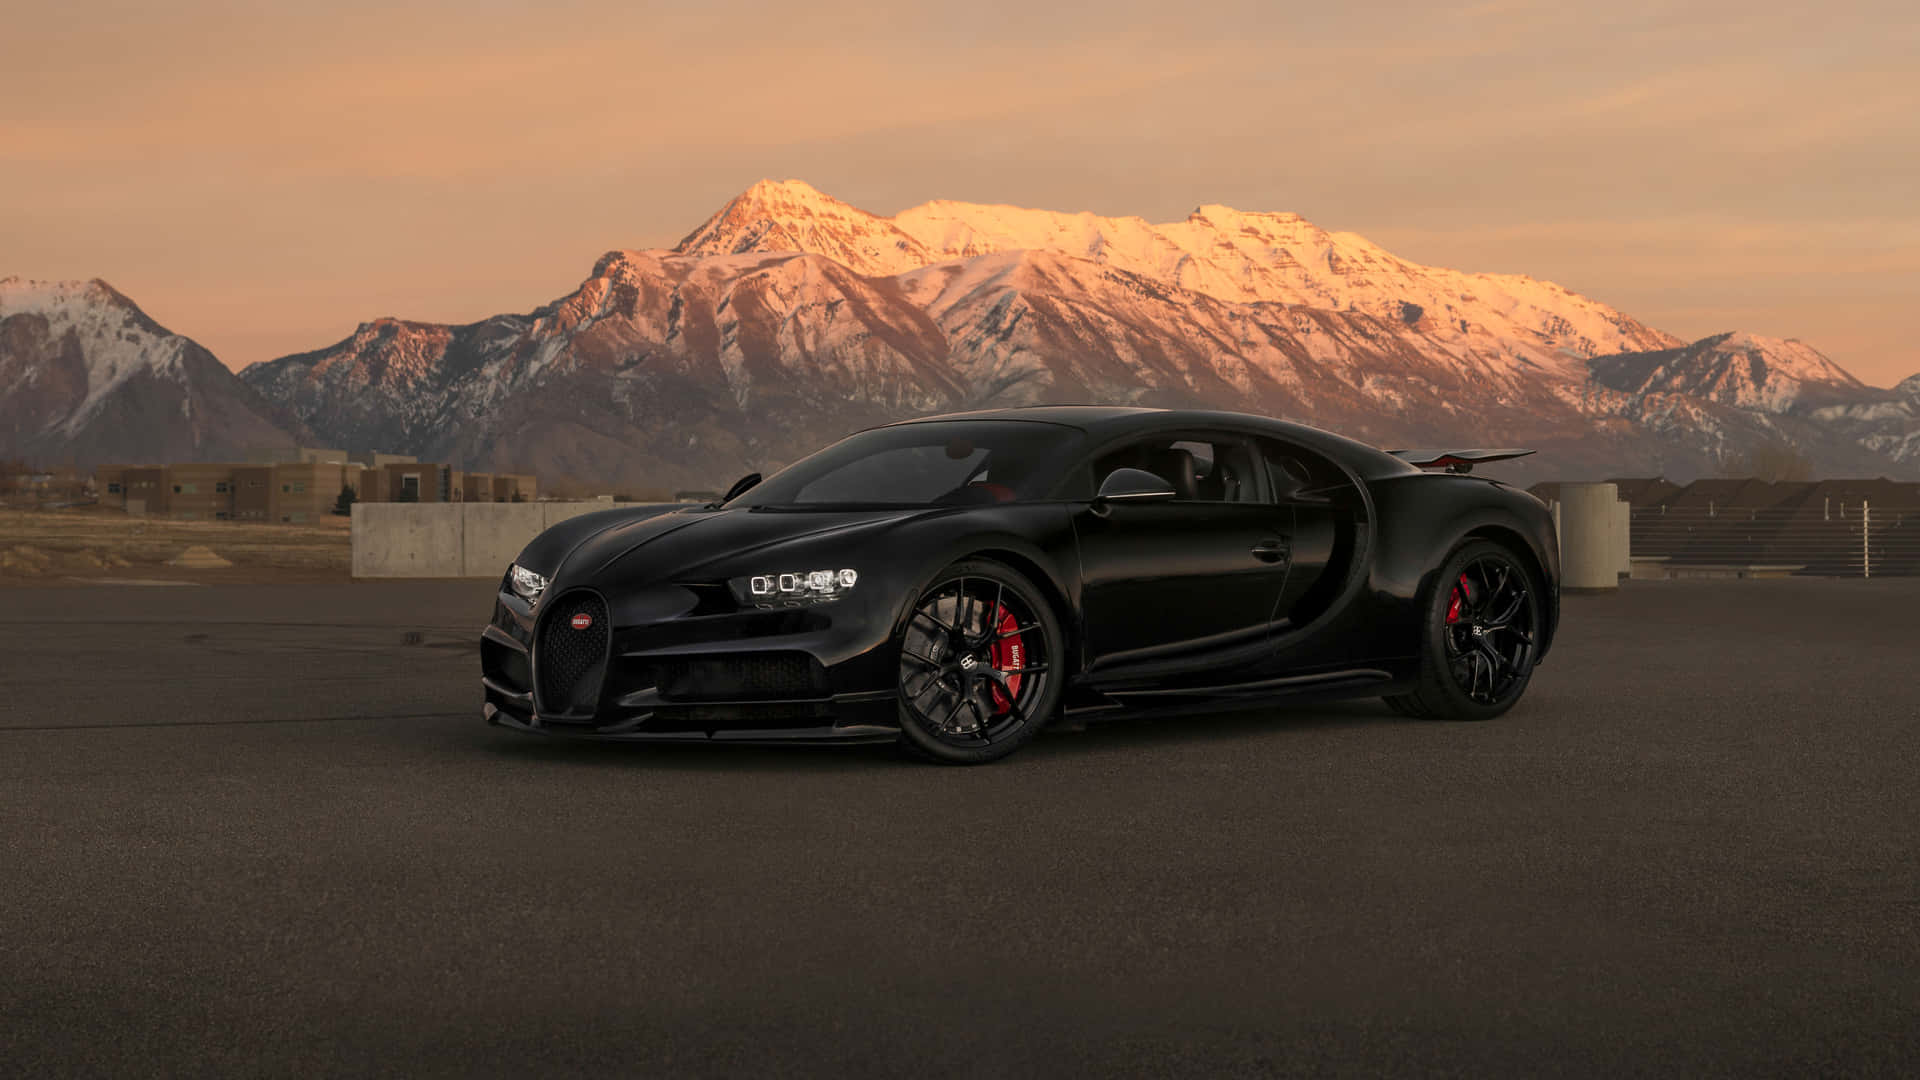 Bugatti Chiron Showcasing its True Power and Elegance on the Road Wallpaper